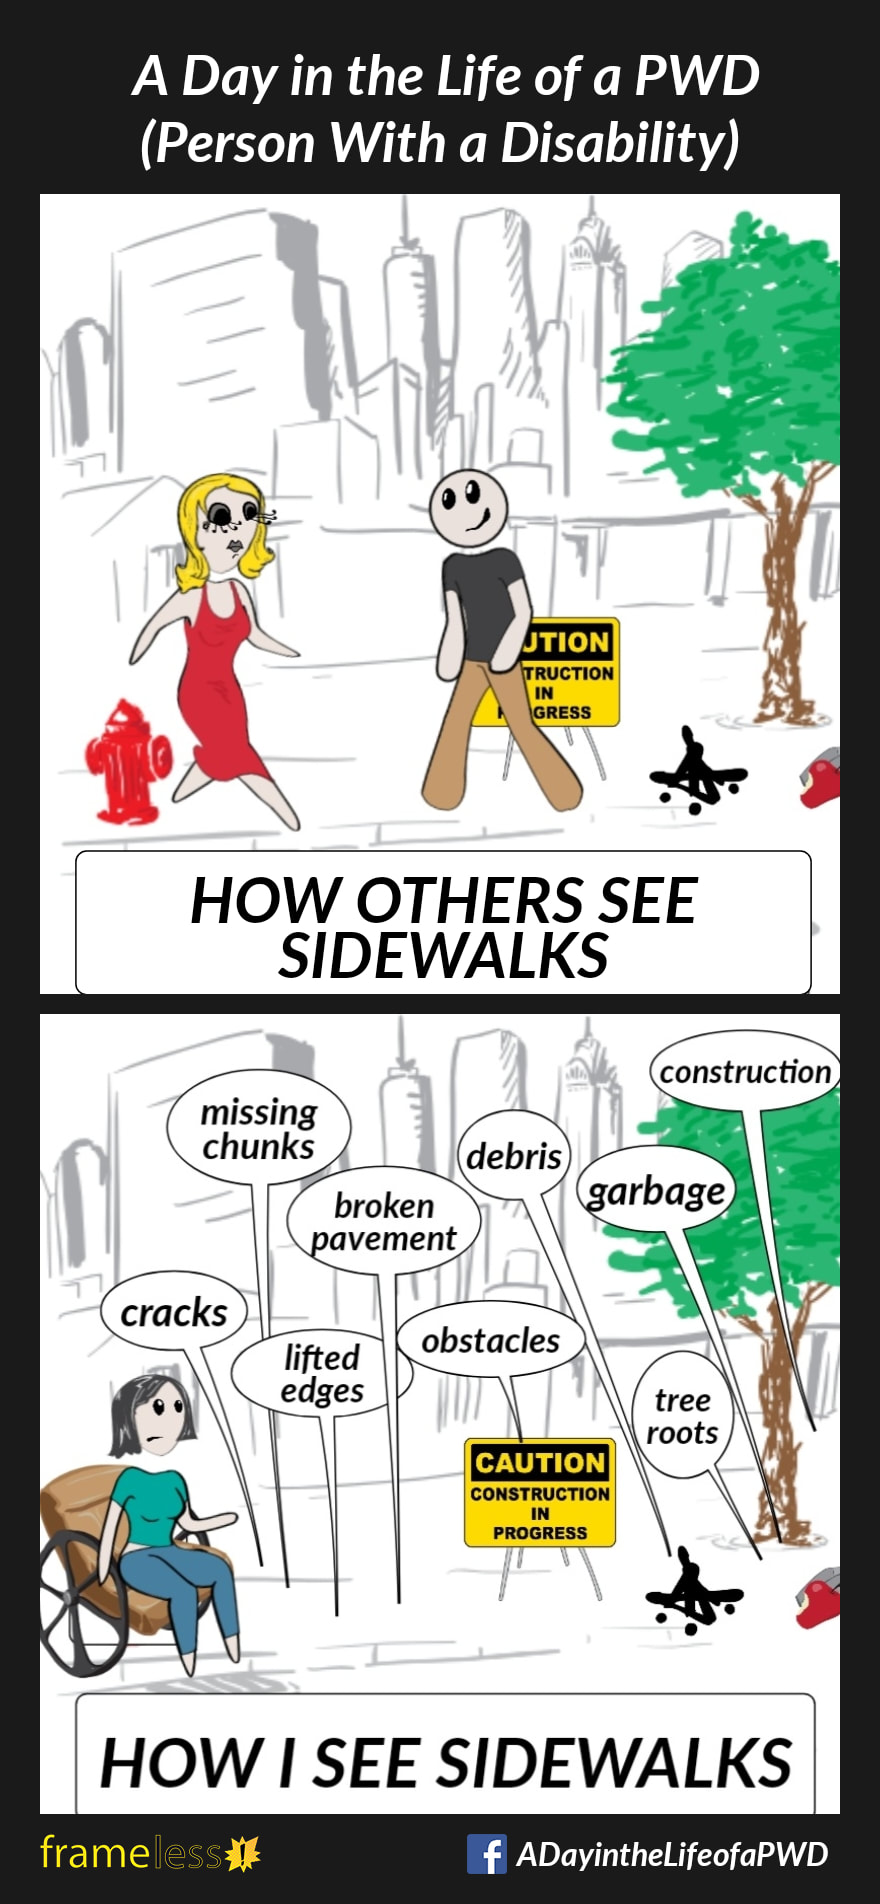 COMIC STRIP 
A Day in the Life of a PWD (Person With a Disability) 

Frame 1:
CAPTION: How Pedestrians See Sidewalks 
A typical sidewalk with a construction sign and debris on it. Pedestrians are walking around the obstacles. 

Frame 2:
CAPTION: How I See Sidewalks 
A woman in a wheelchair is looking at the sidewalk. There are arrows pointing to the various issues, listing them:
-cracks
-missing chunks
-lifted edges
-broken pavement
-debris
-obstacles
-tree roots
-garbage
-construction